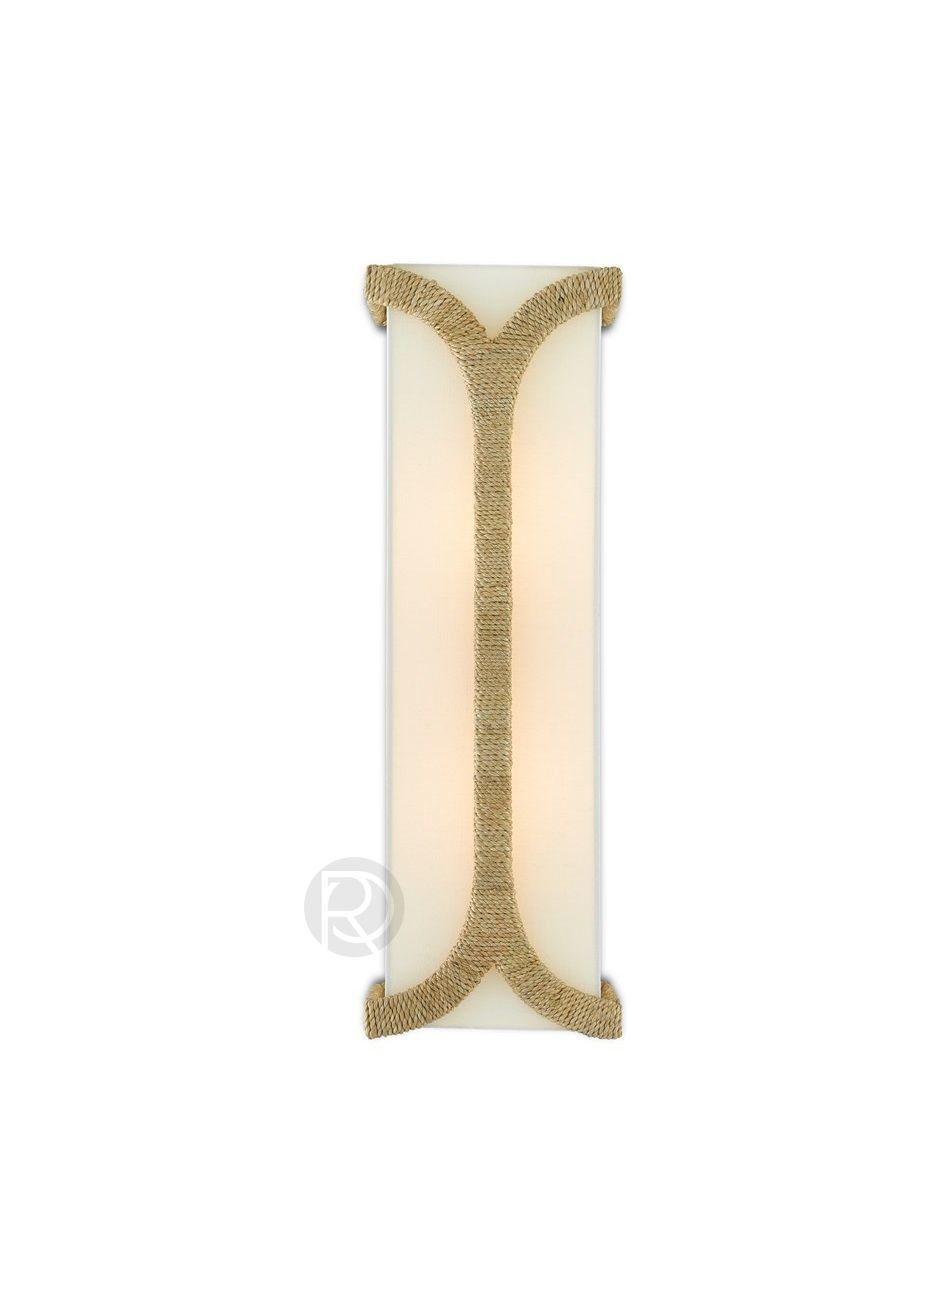 Wall lamp (Sconce) CARTHAY by Currey & Company